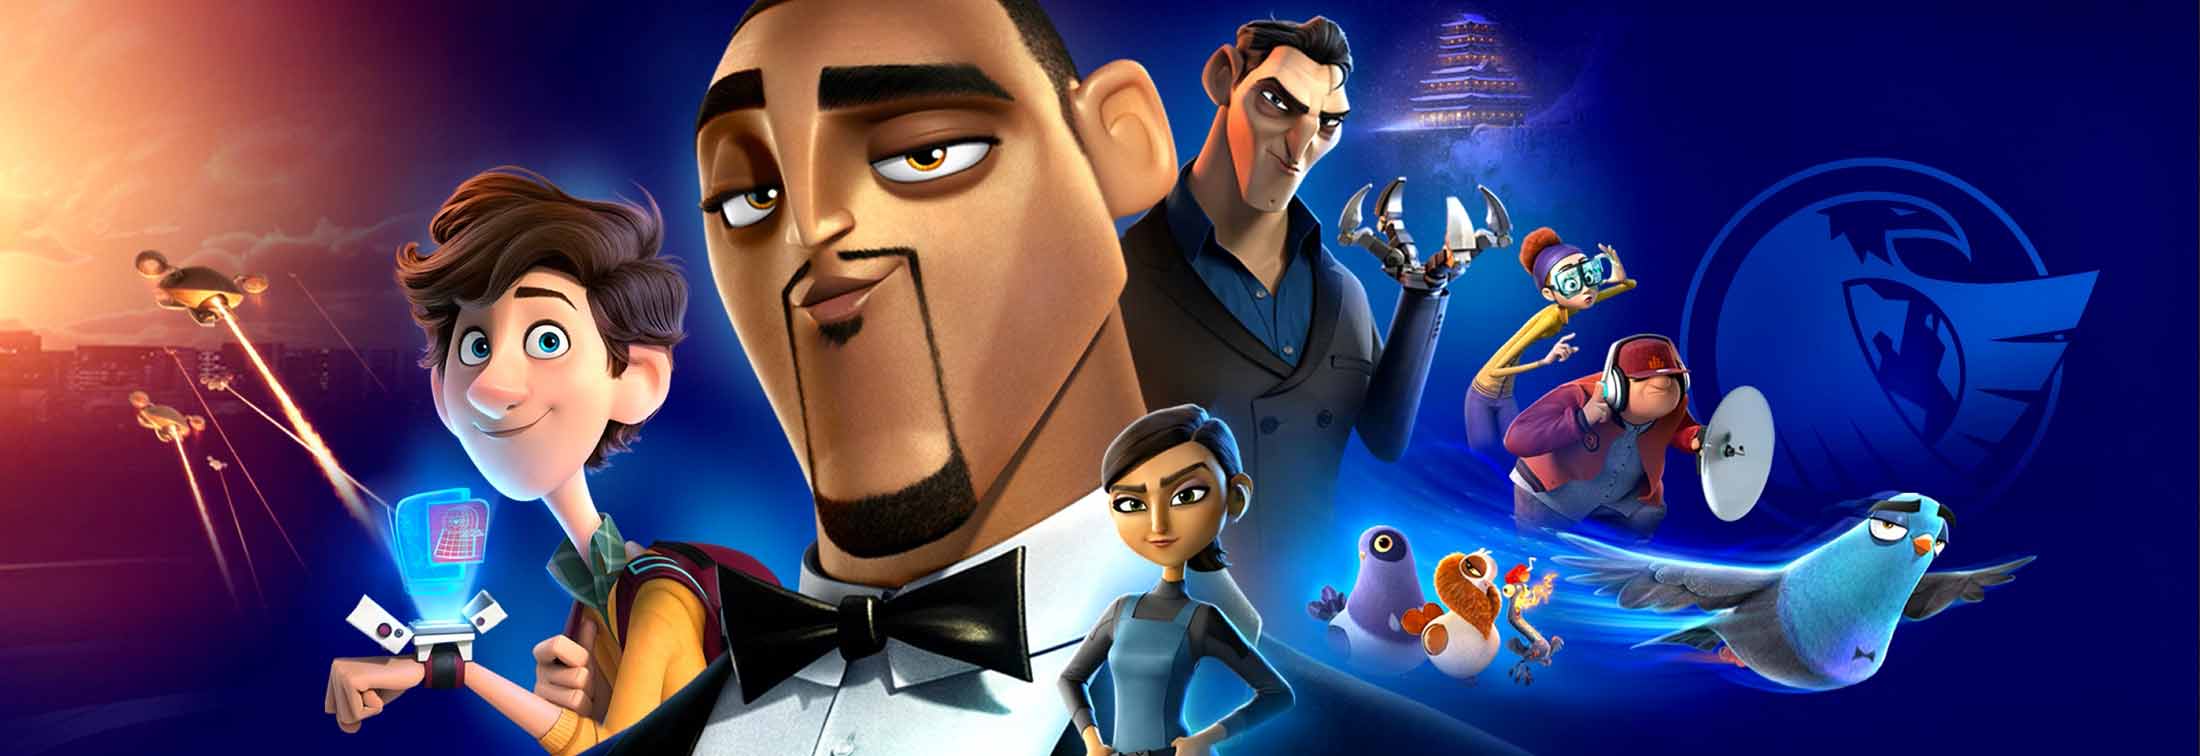 Spies in Disguise - An awesome animated spy film for the whole family